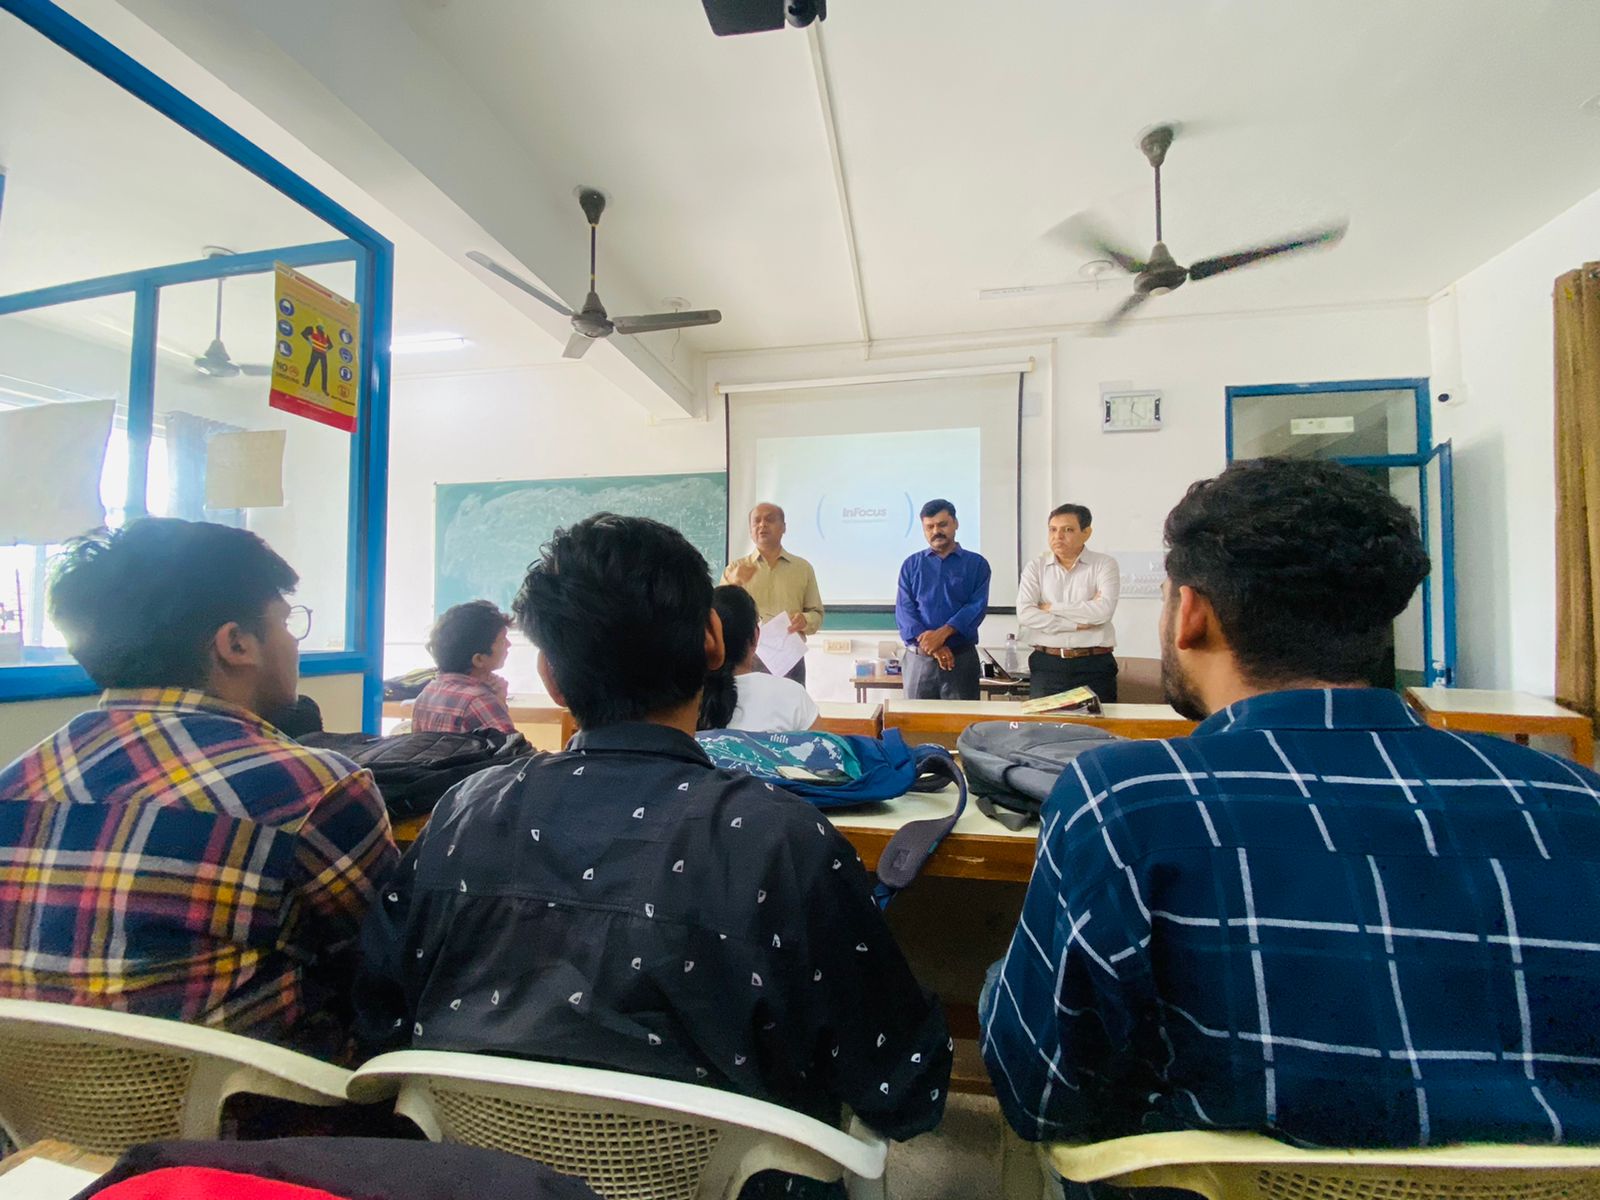 Prof. Dr. P M Udani gave a lecture to the students  on Multidisciplinary approach which  is key to success in future.